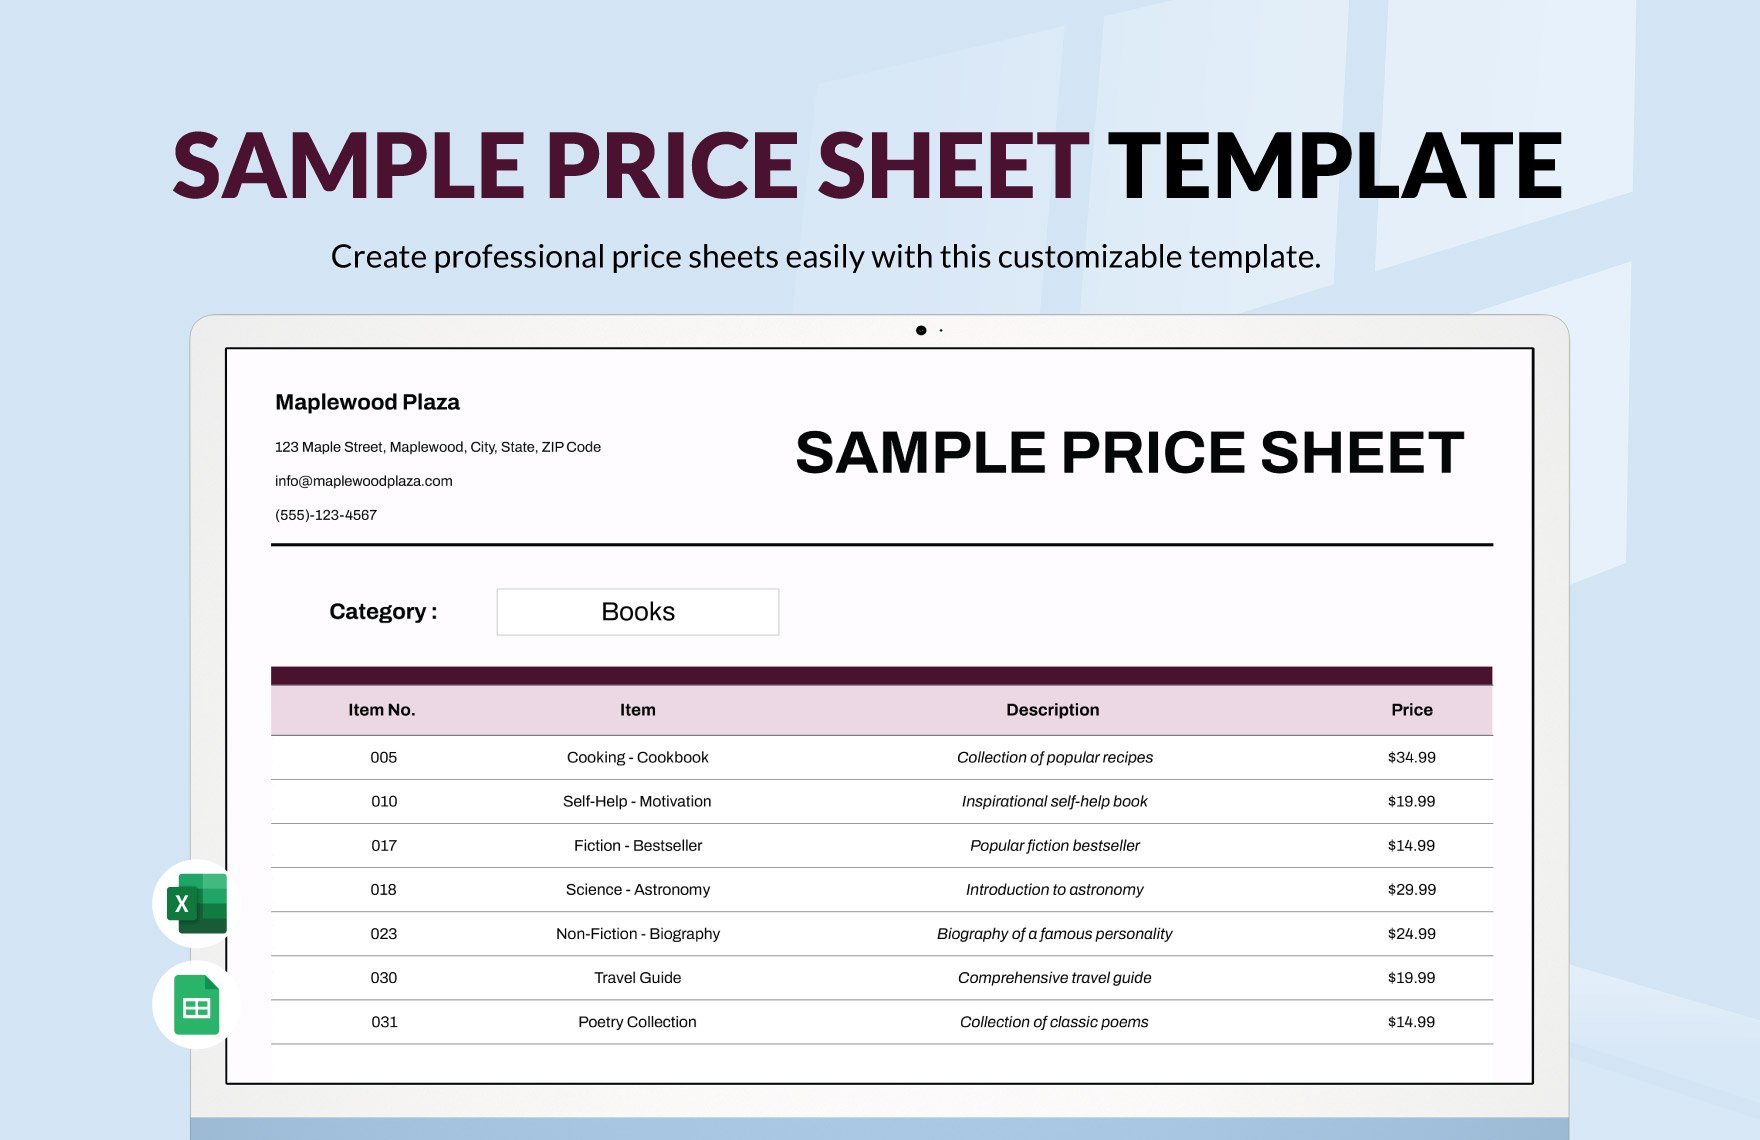 Sample Price Sheet Template in Excel, Google Sheets